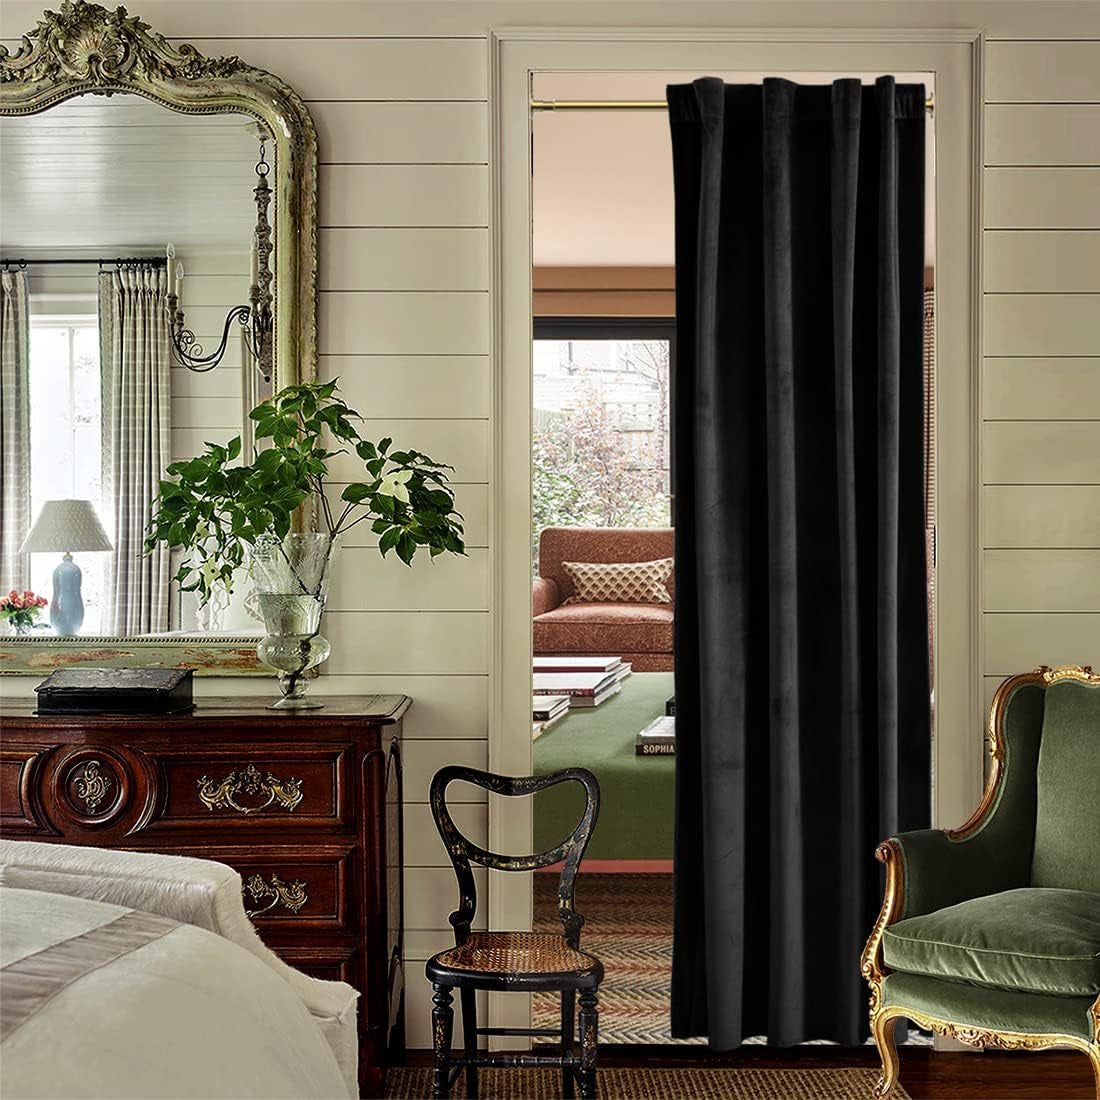 XTMYI Velvet Blackout Door Curtain Panels for Bedroom,Thermal Insulated Winter Warm Back Tab Rod Pocket Black Out Cover Doorway Curtains Privacy/Window Drapes,80 Inch Length  XTMYI TEXTILE   